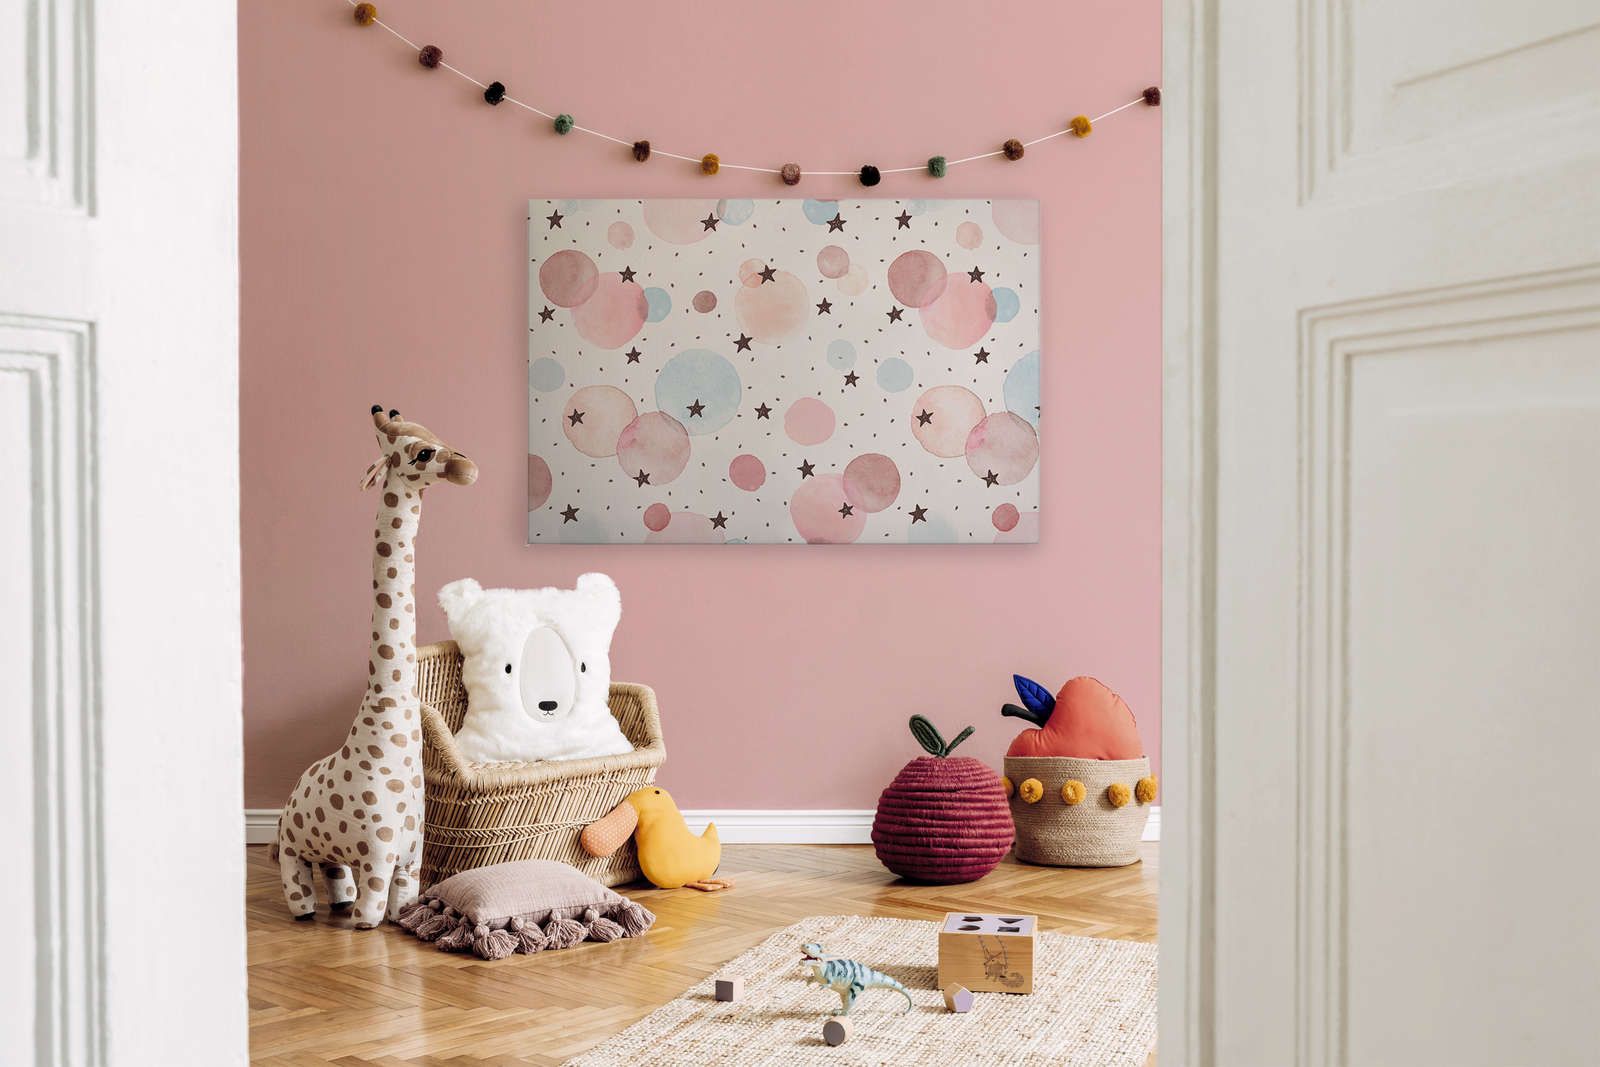             Canvas for children's room with stars, dots and circles - 120 cm x 80 cm
        